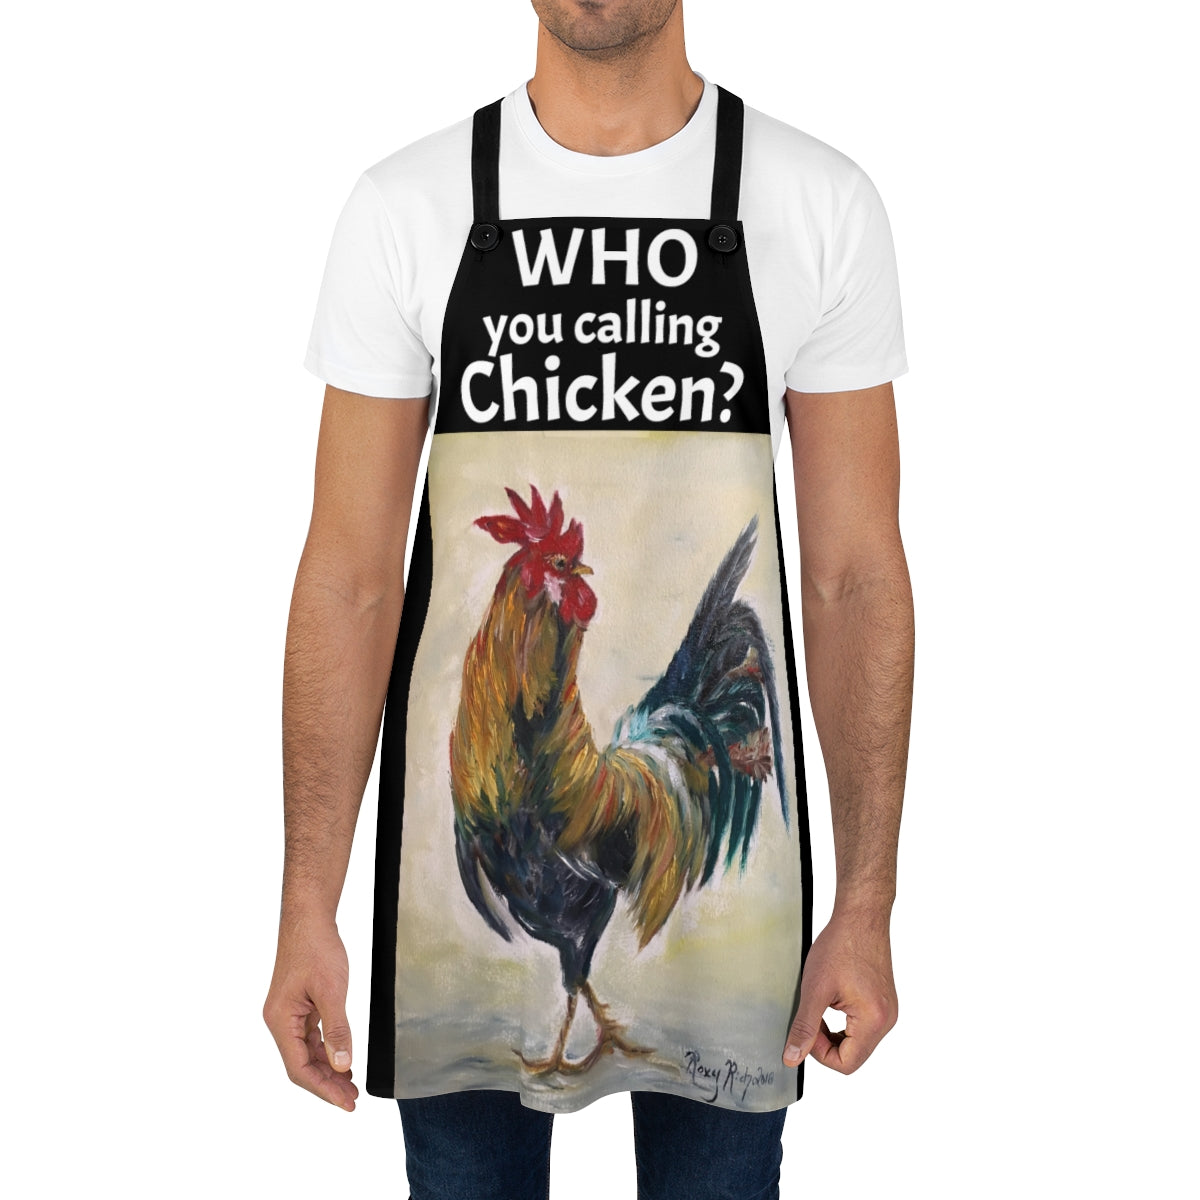 Original Rooster Painting  WHO you calling Chicken? funny saying Art Printed on Black Apron